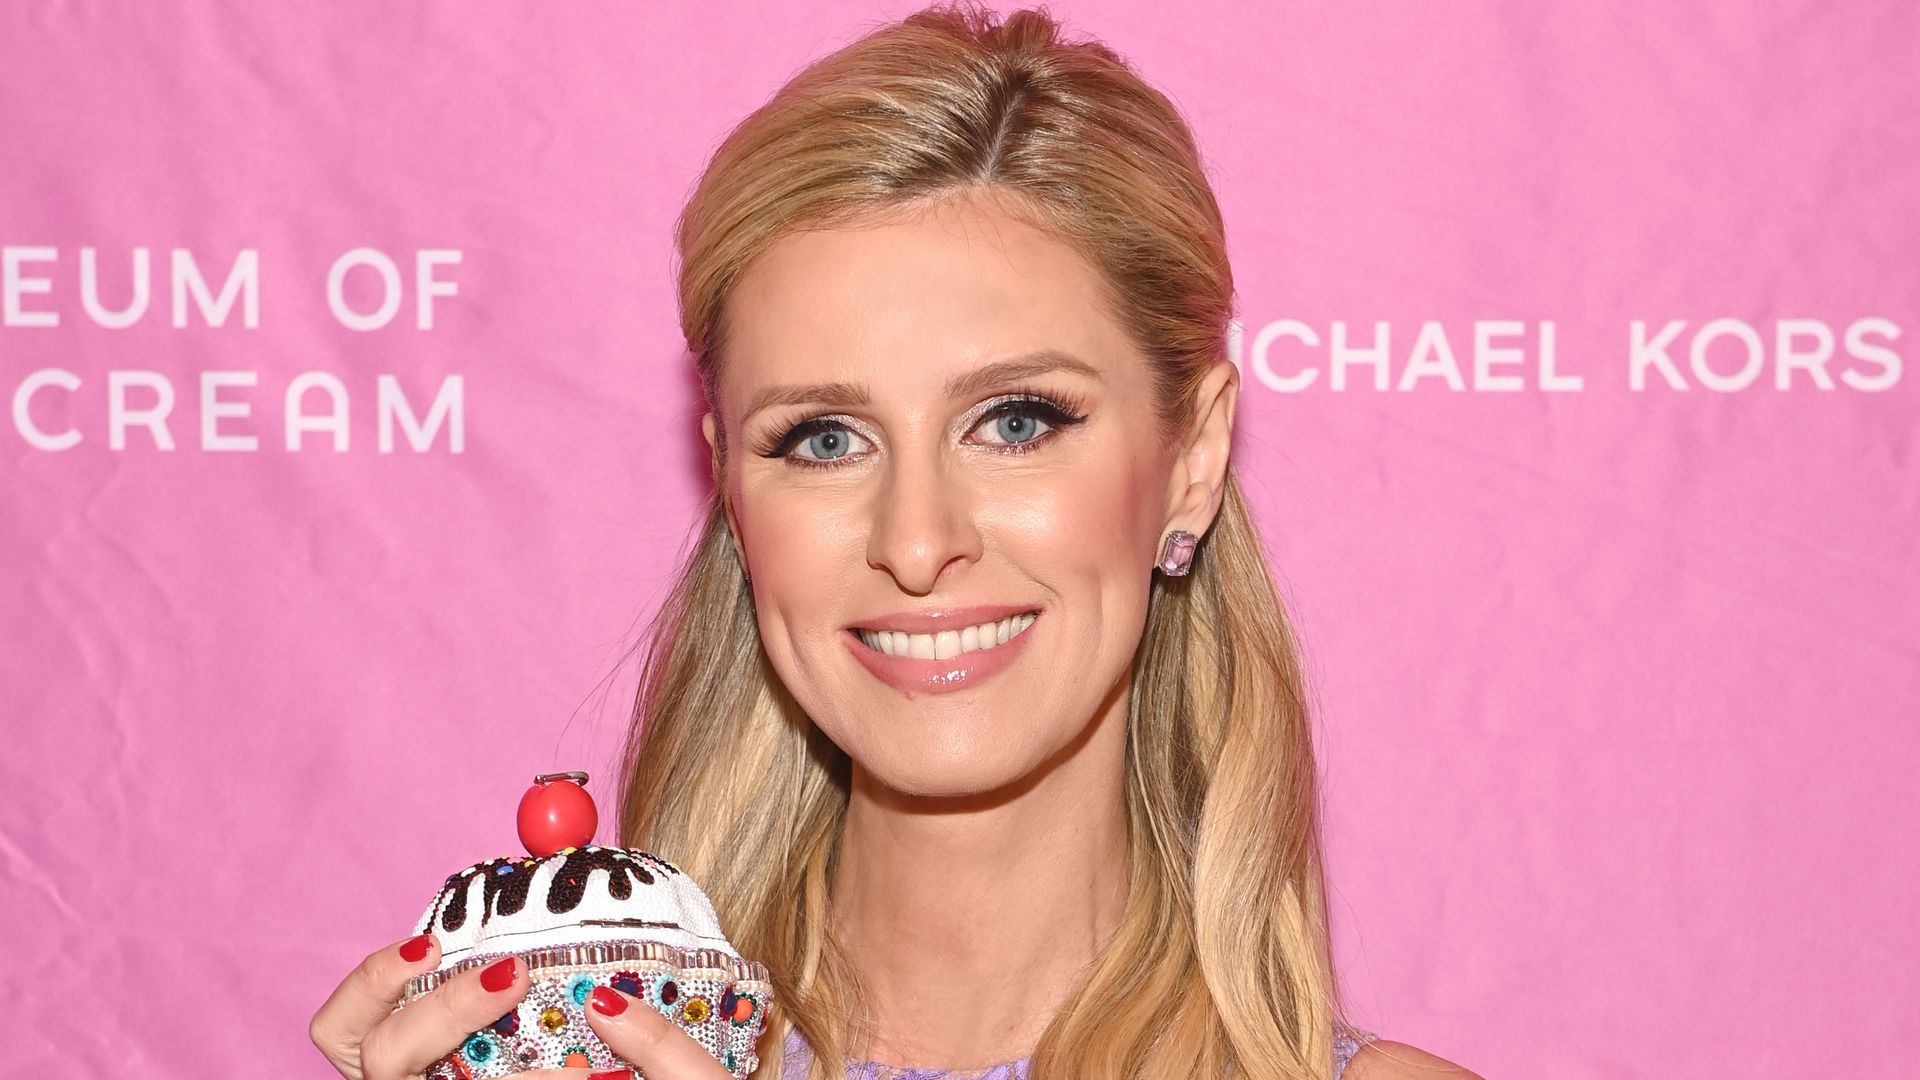 Nicky Hilton makes first public outing with 18-month-old son alongside daughters Lily-Grace, seven, and Teddy, six